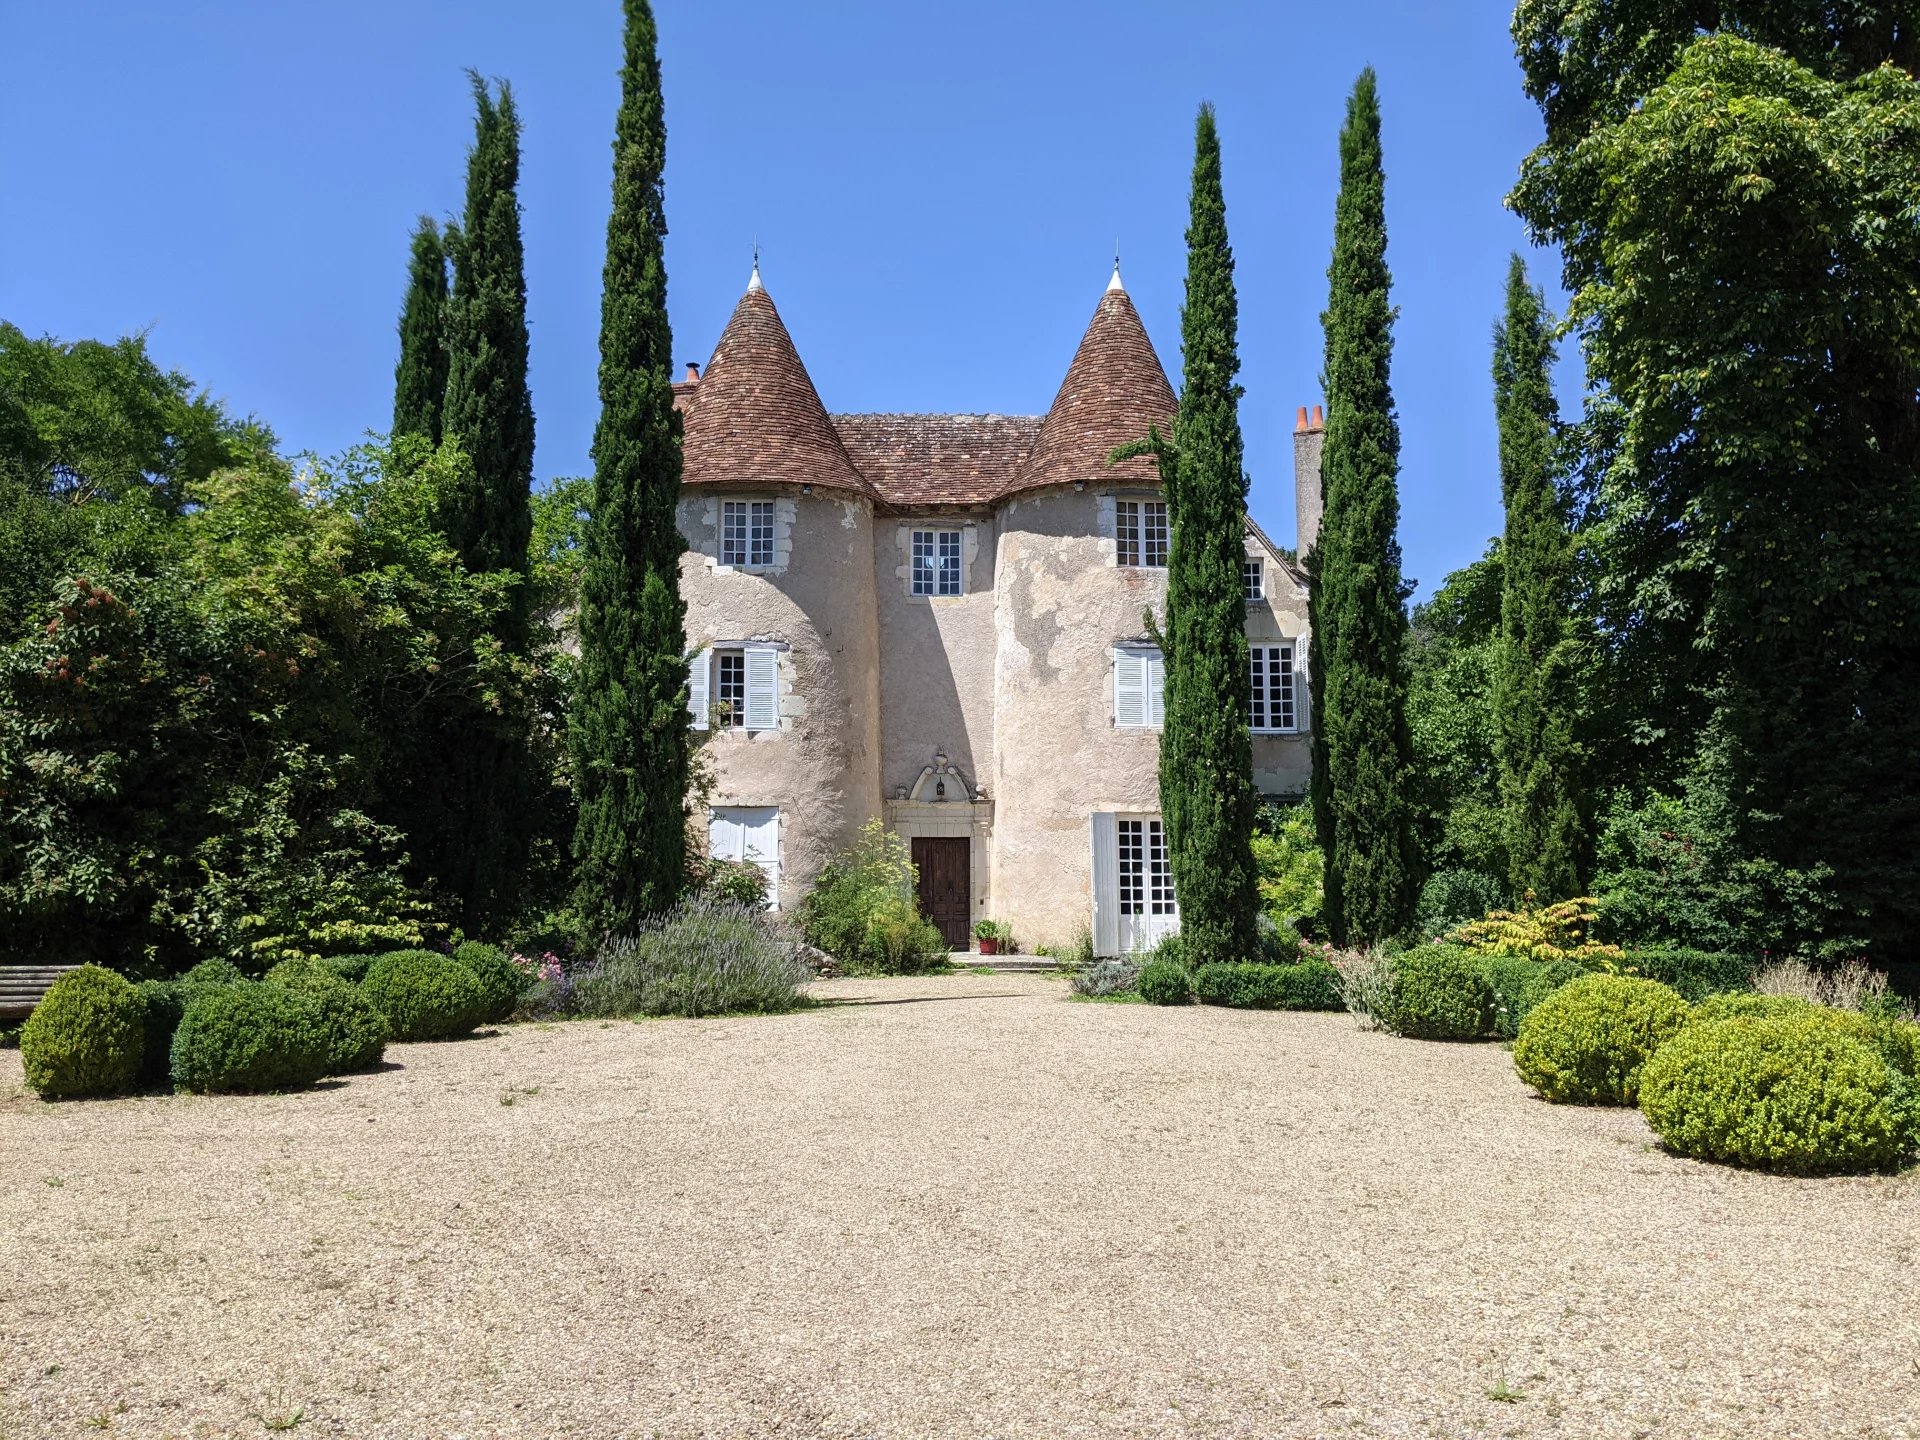 Outstanding 15th century Château located in the Brenne National park